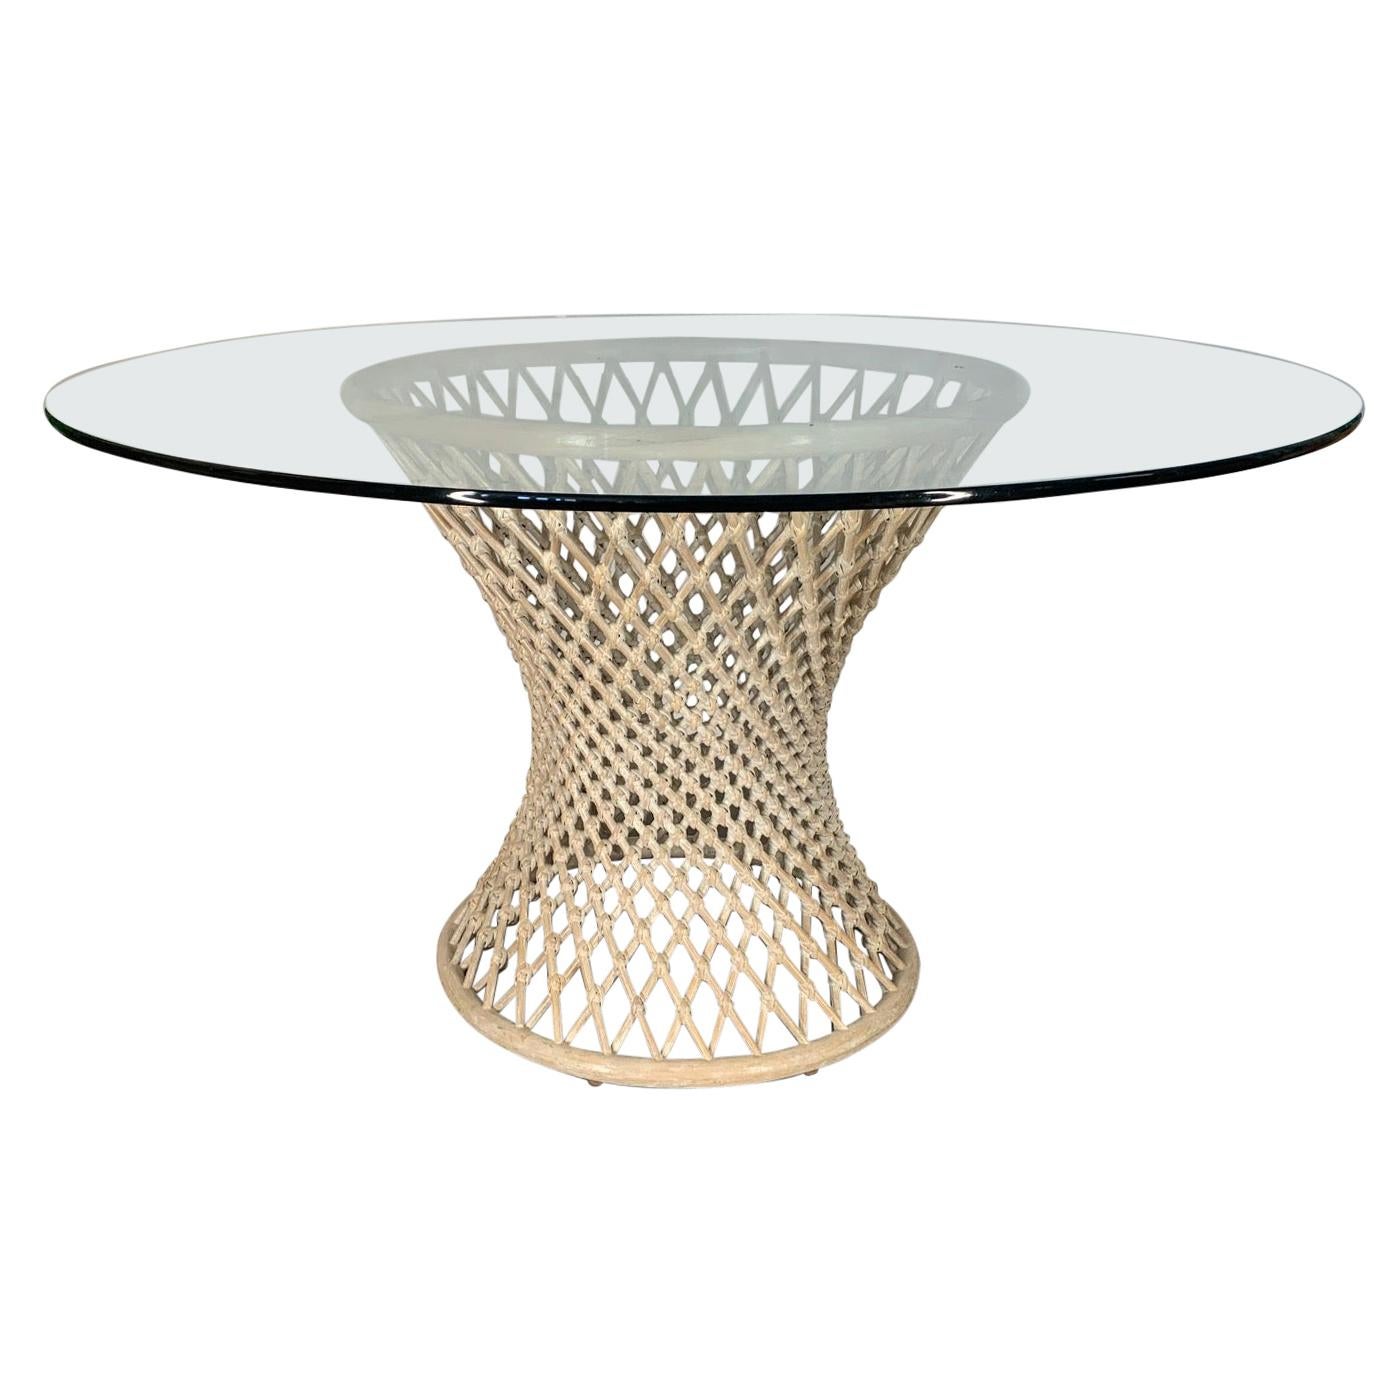 Woven Rattan Sculptural Dining Table